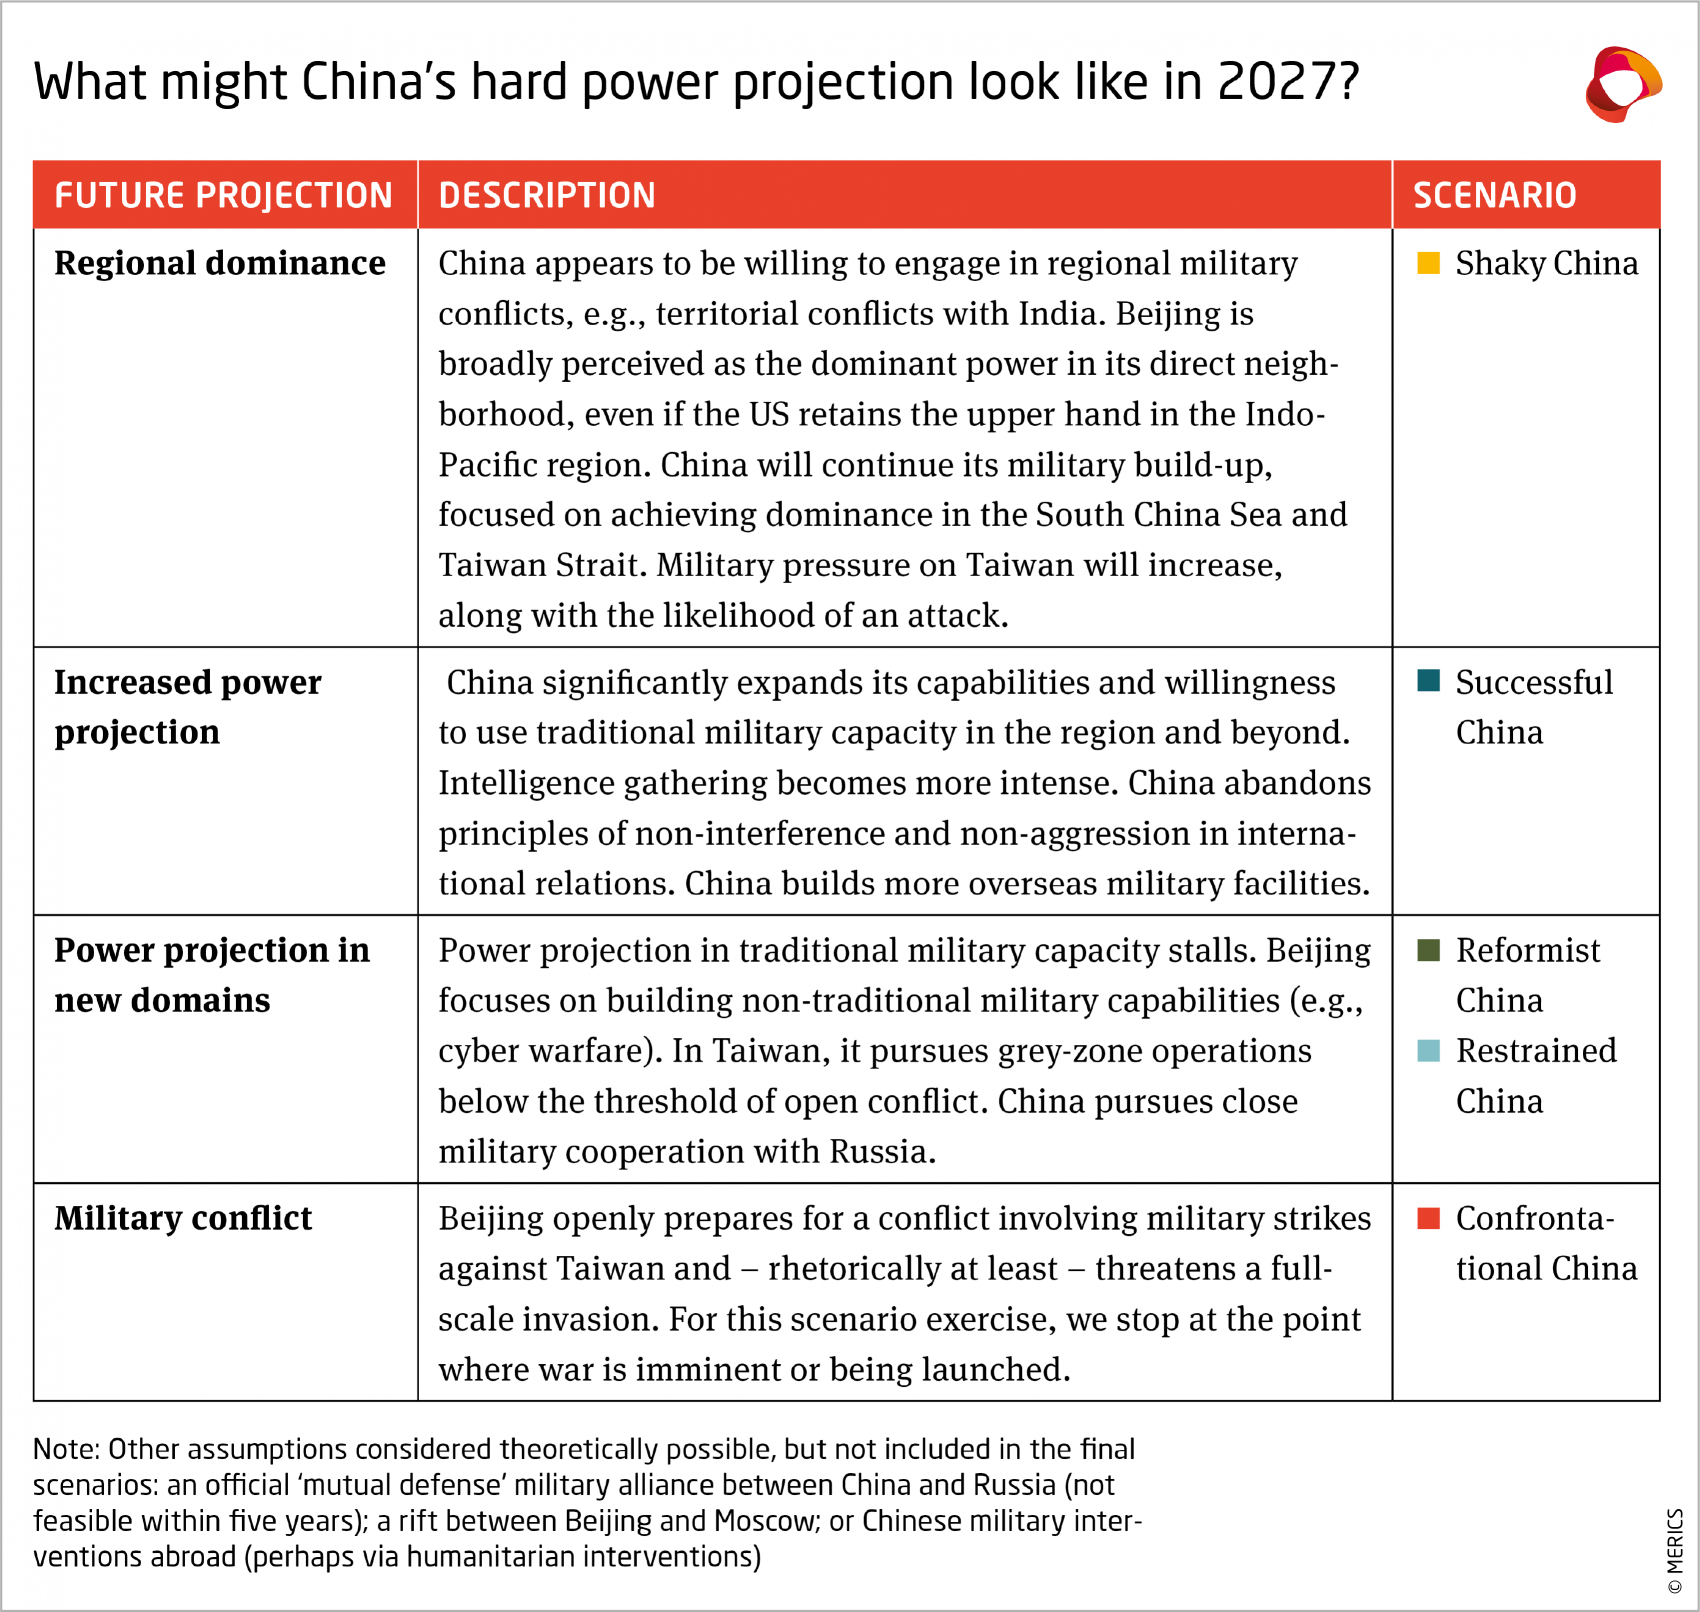 China's hard power projection in 2027